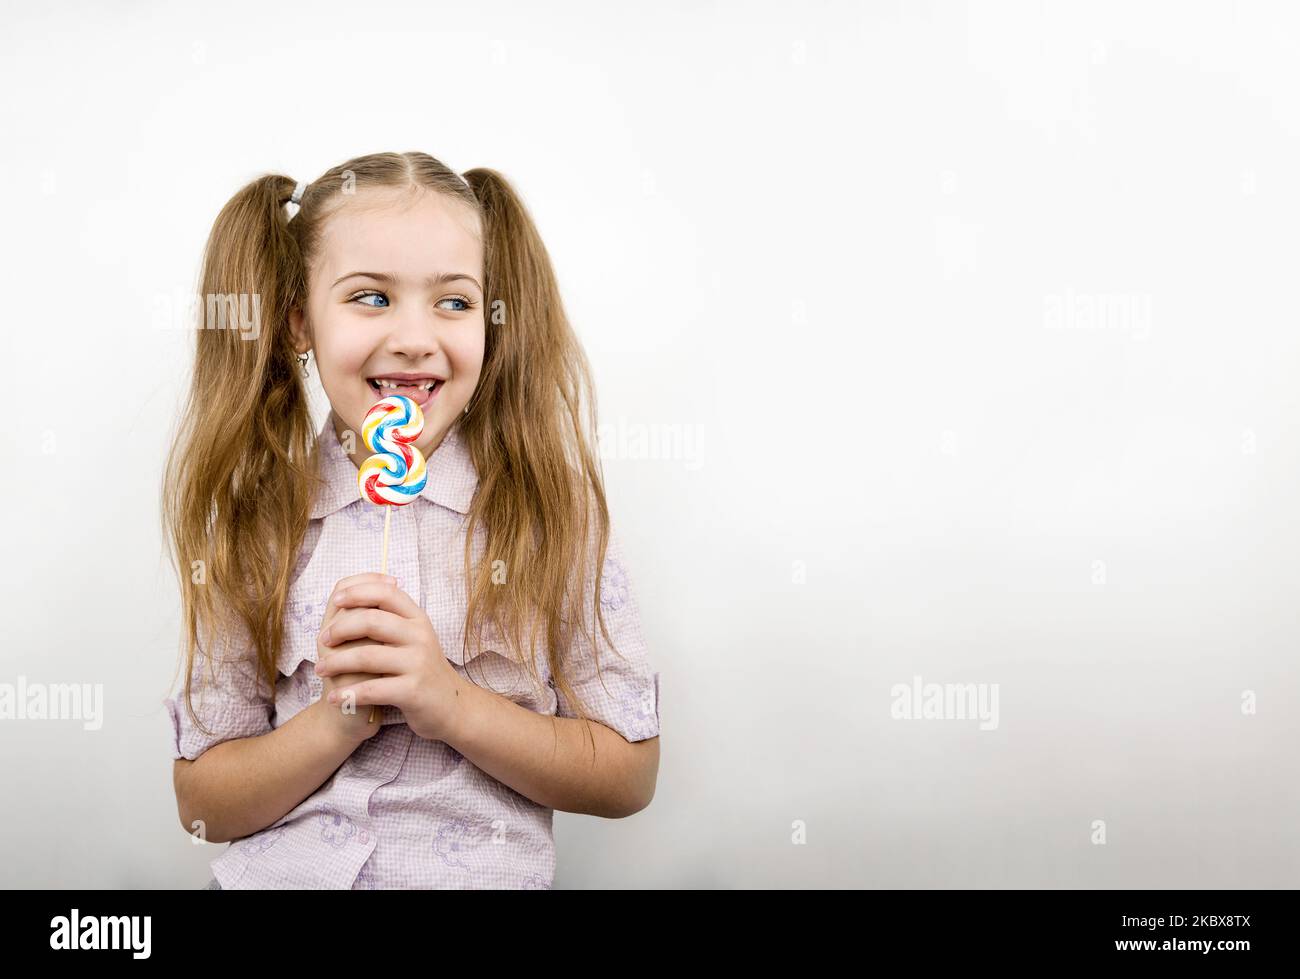 Beautiful girl with blue eyes eating lollipop isolated on white Stock Photo